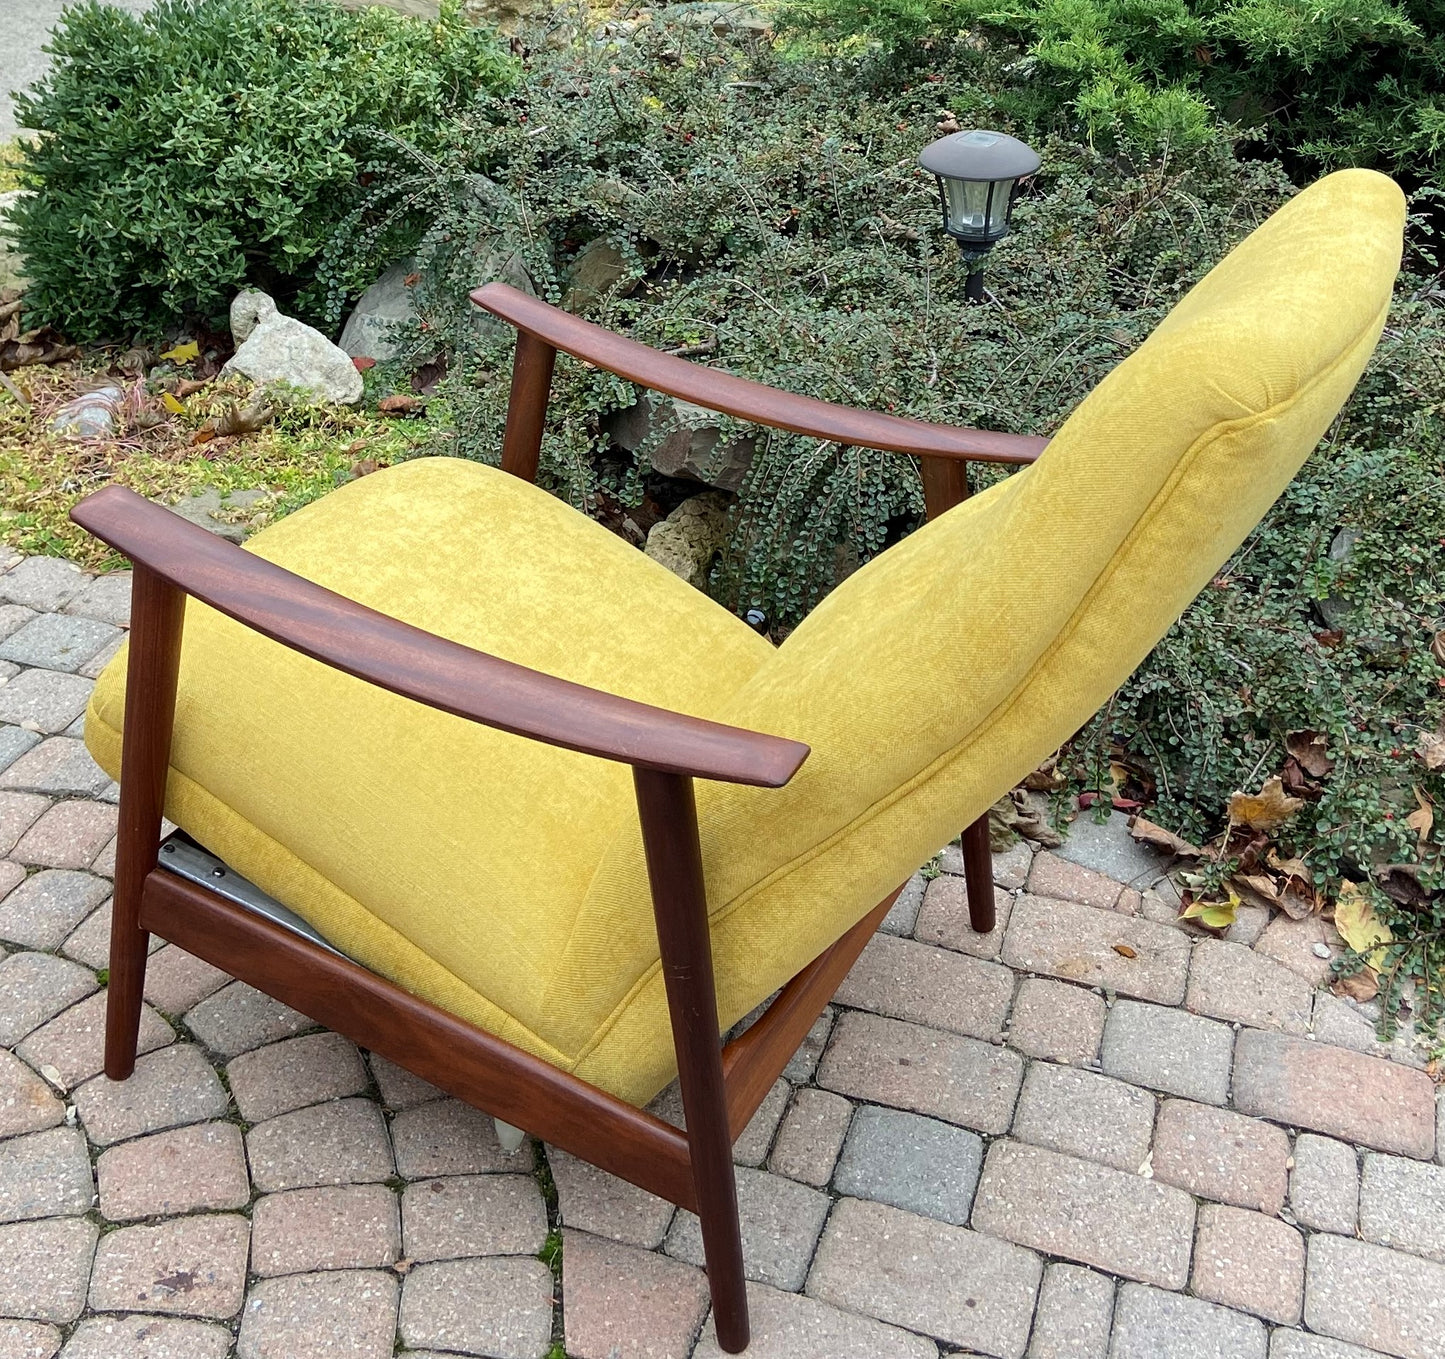 REFINISHED REUPHOLSTERED Mid-Century Modern Lounge Chair Recliner by Arnt Lande